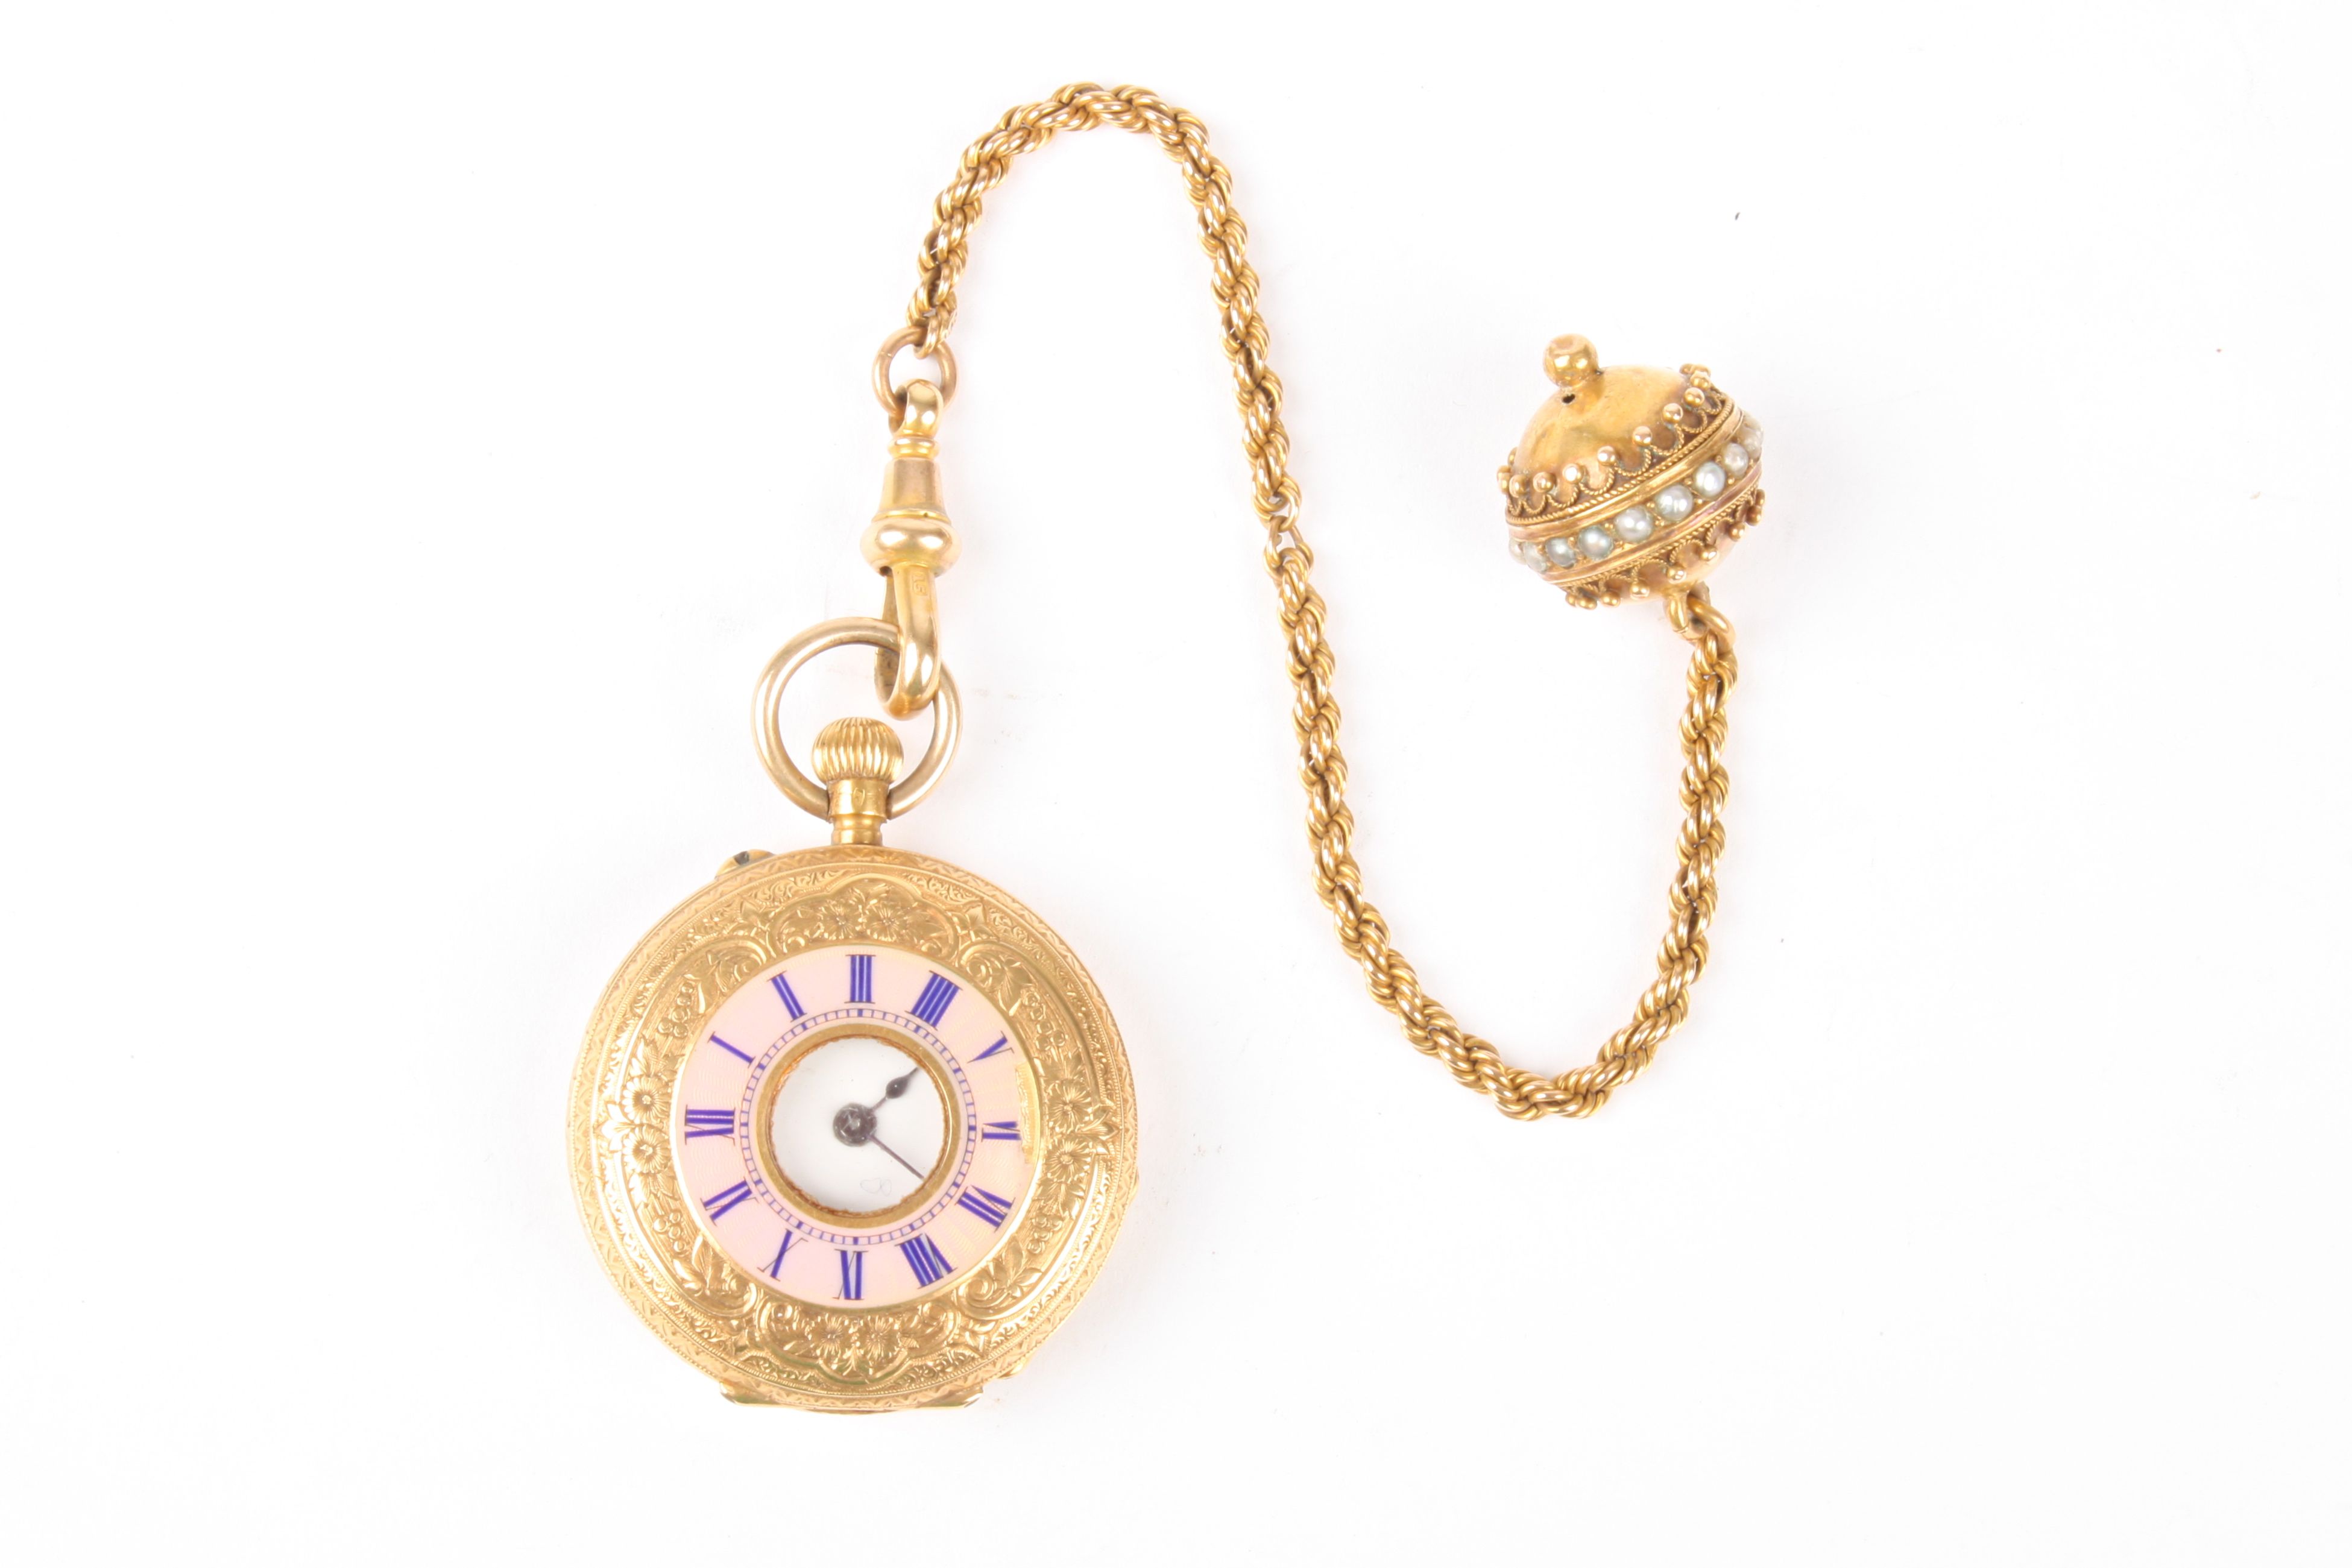 A ladies French 18ct gold and enamel half hunter fob watch with chain and pendant
the half hunter